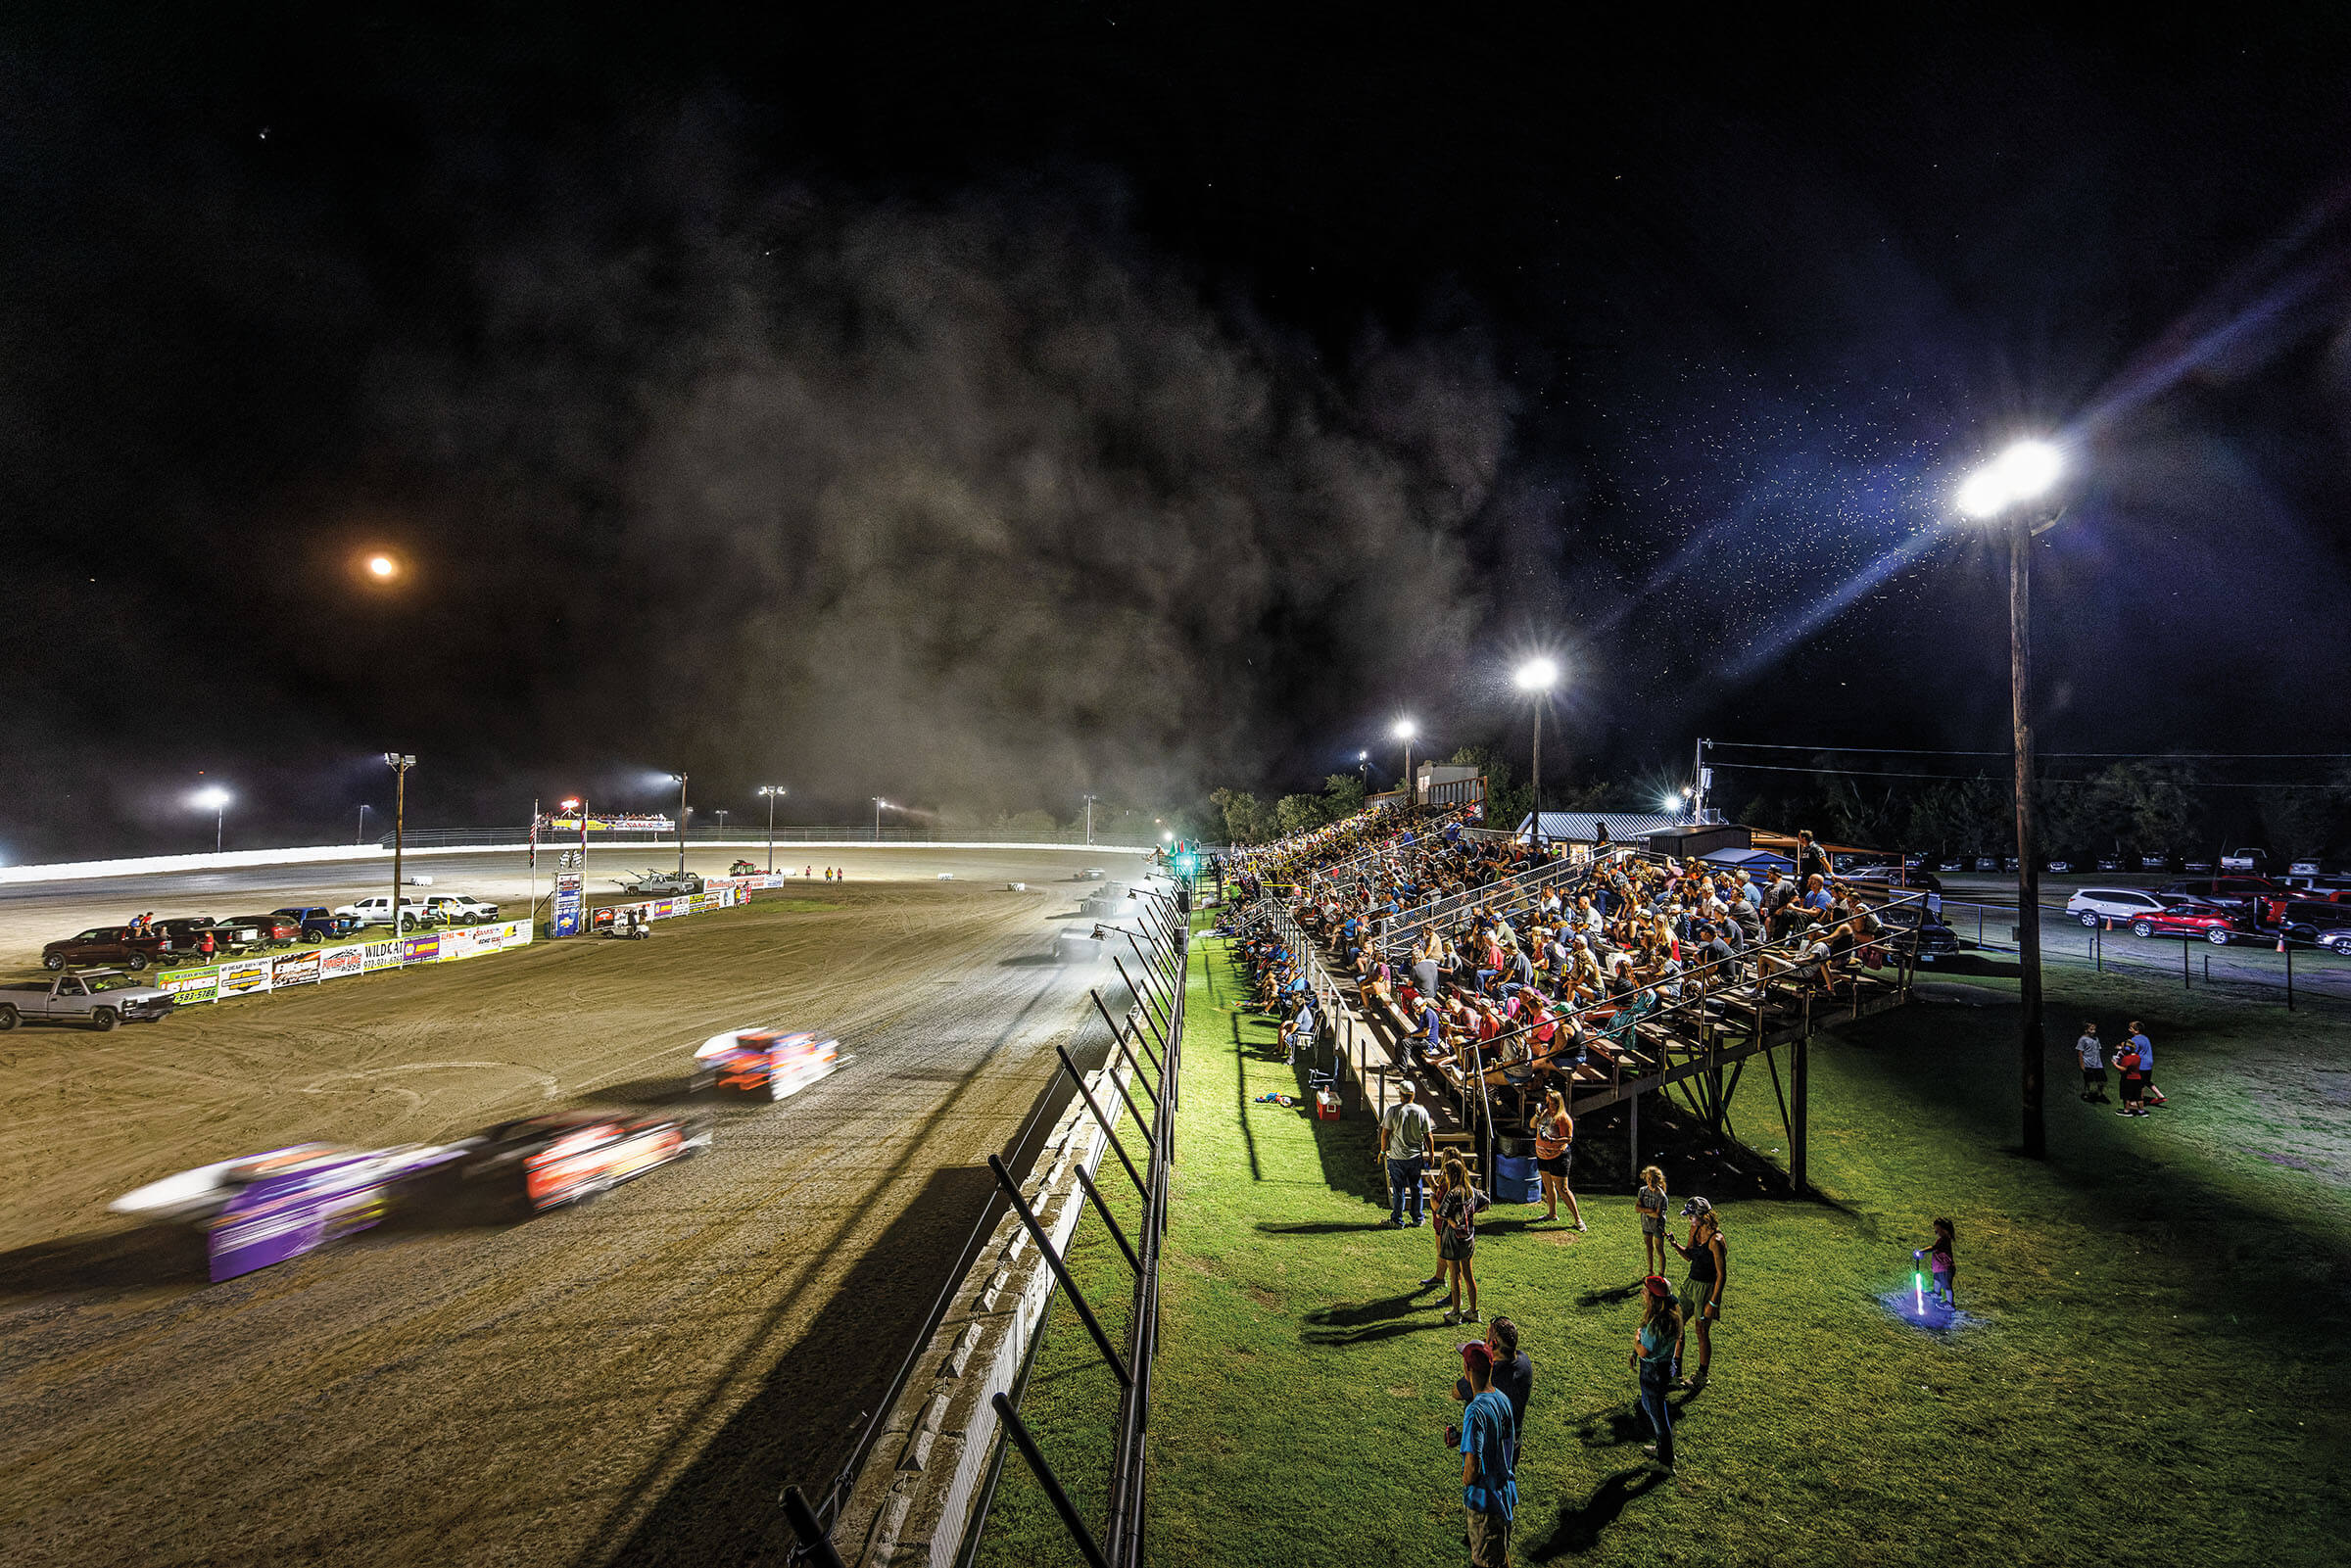 A crowd of spectators sit in stands as a group of racecars whiz by on a dirt track to their left